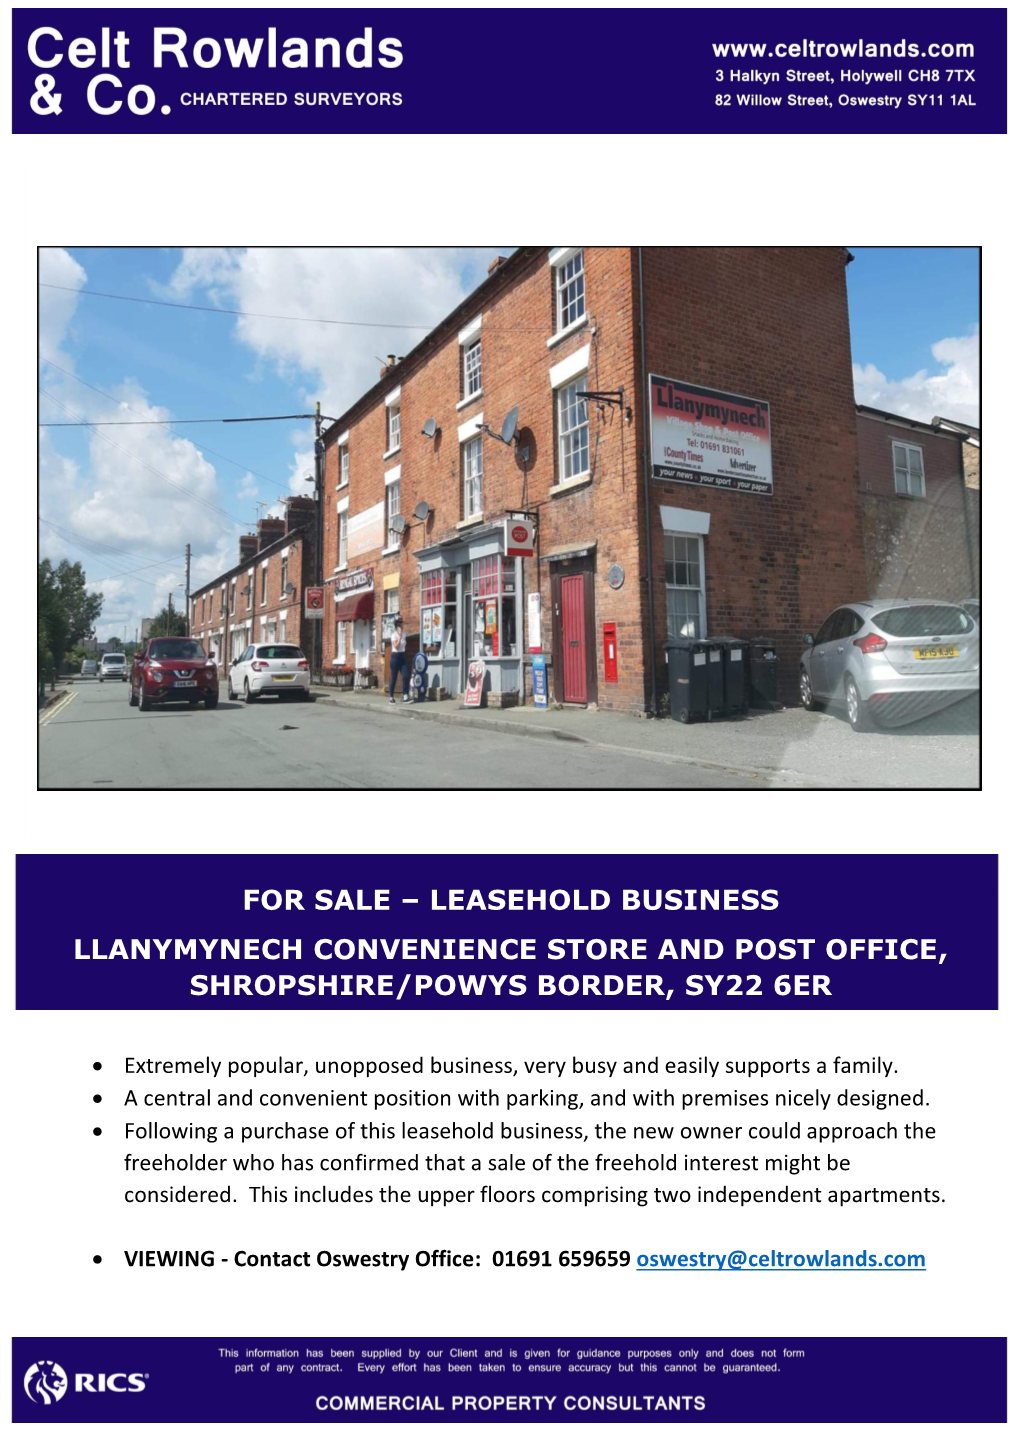 For Sale – Leasehold Business Llanymynech Convenience Store and Post Office, Shropshire/Powys Border, Sy22 6Er